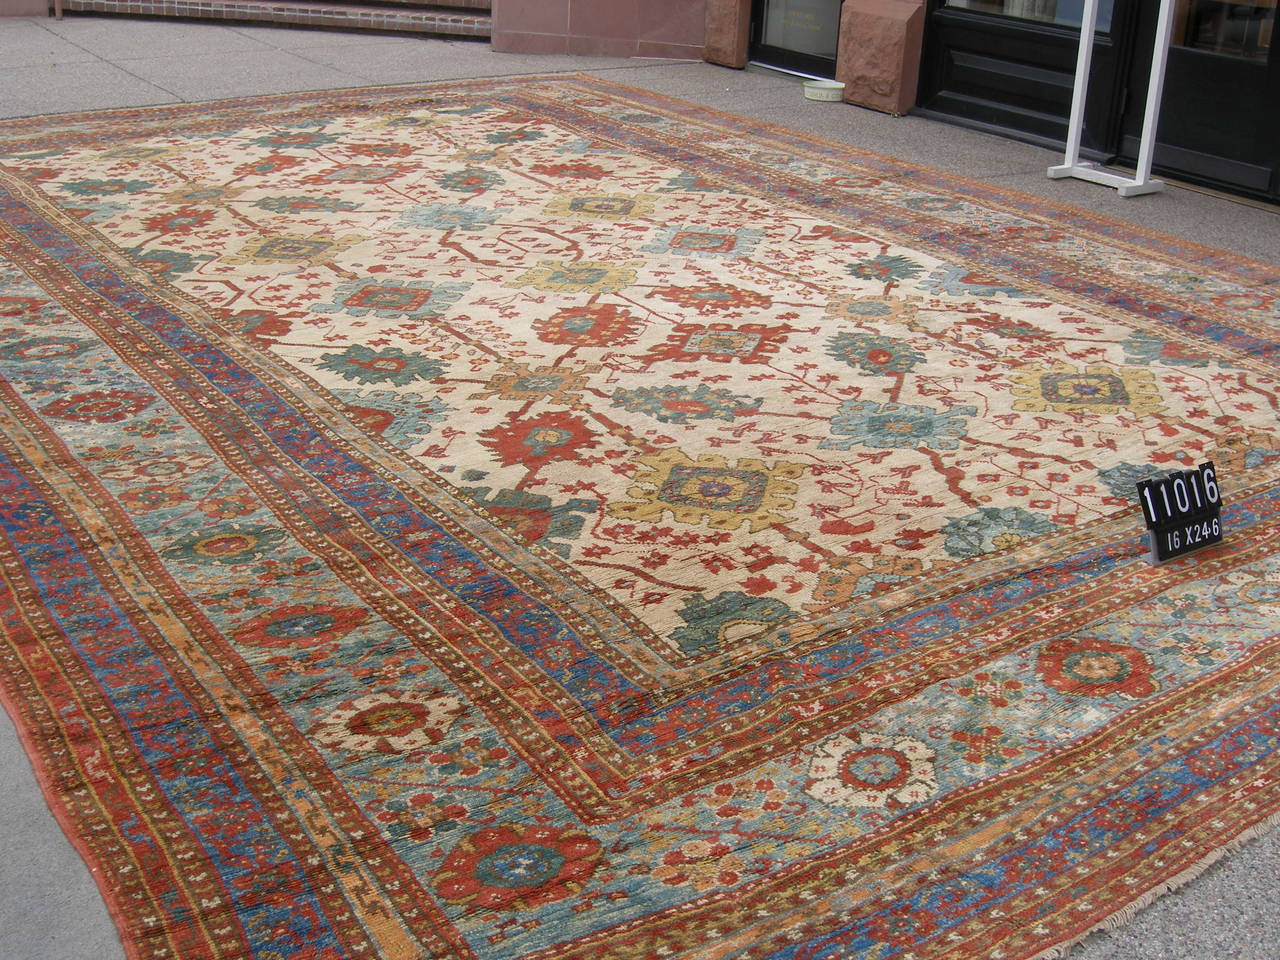 Classic antique Turkish Ushak. This rug was woven in Ushak district of Central Anatolia, circa 1875. This Ushak is a beautiful example of the Ushak carpets because of the repeat design and large oversize format. The condition is excellent with full